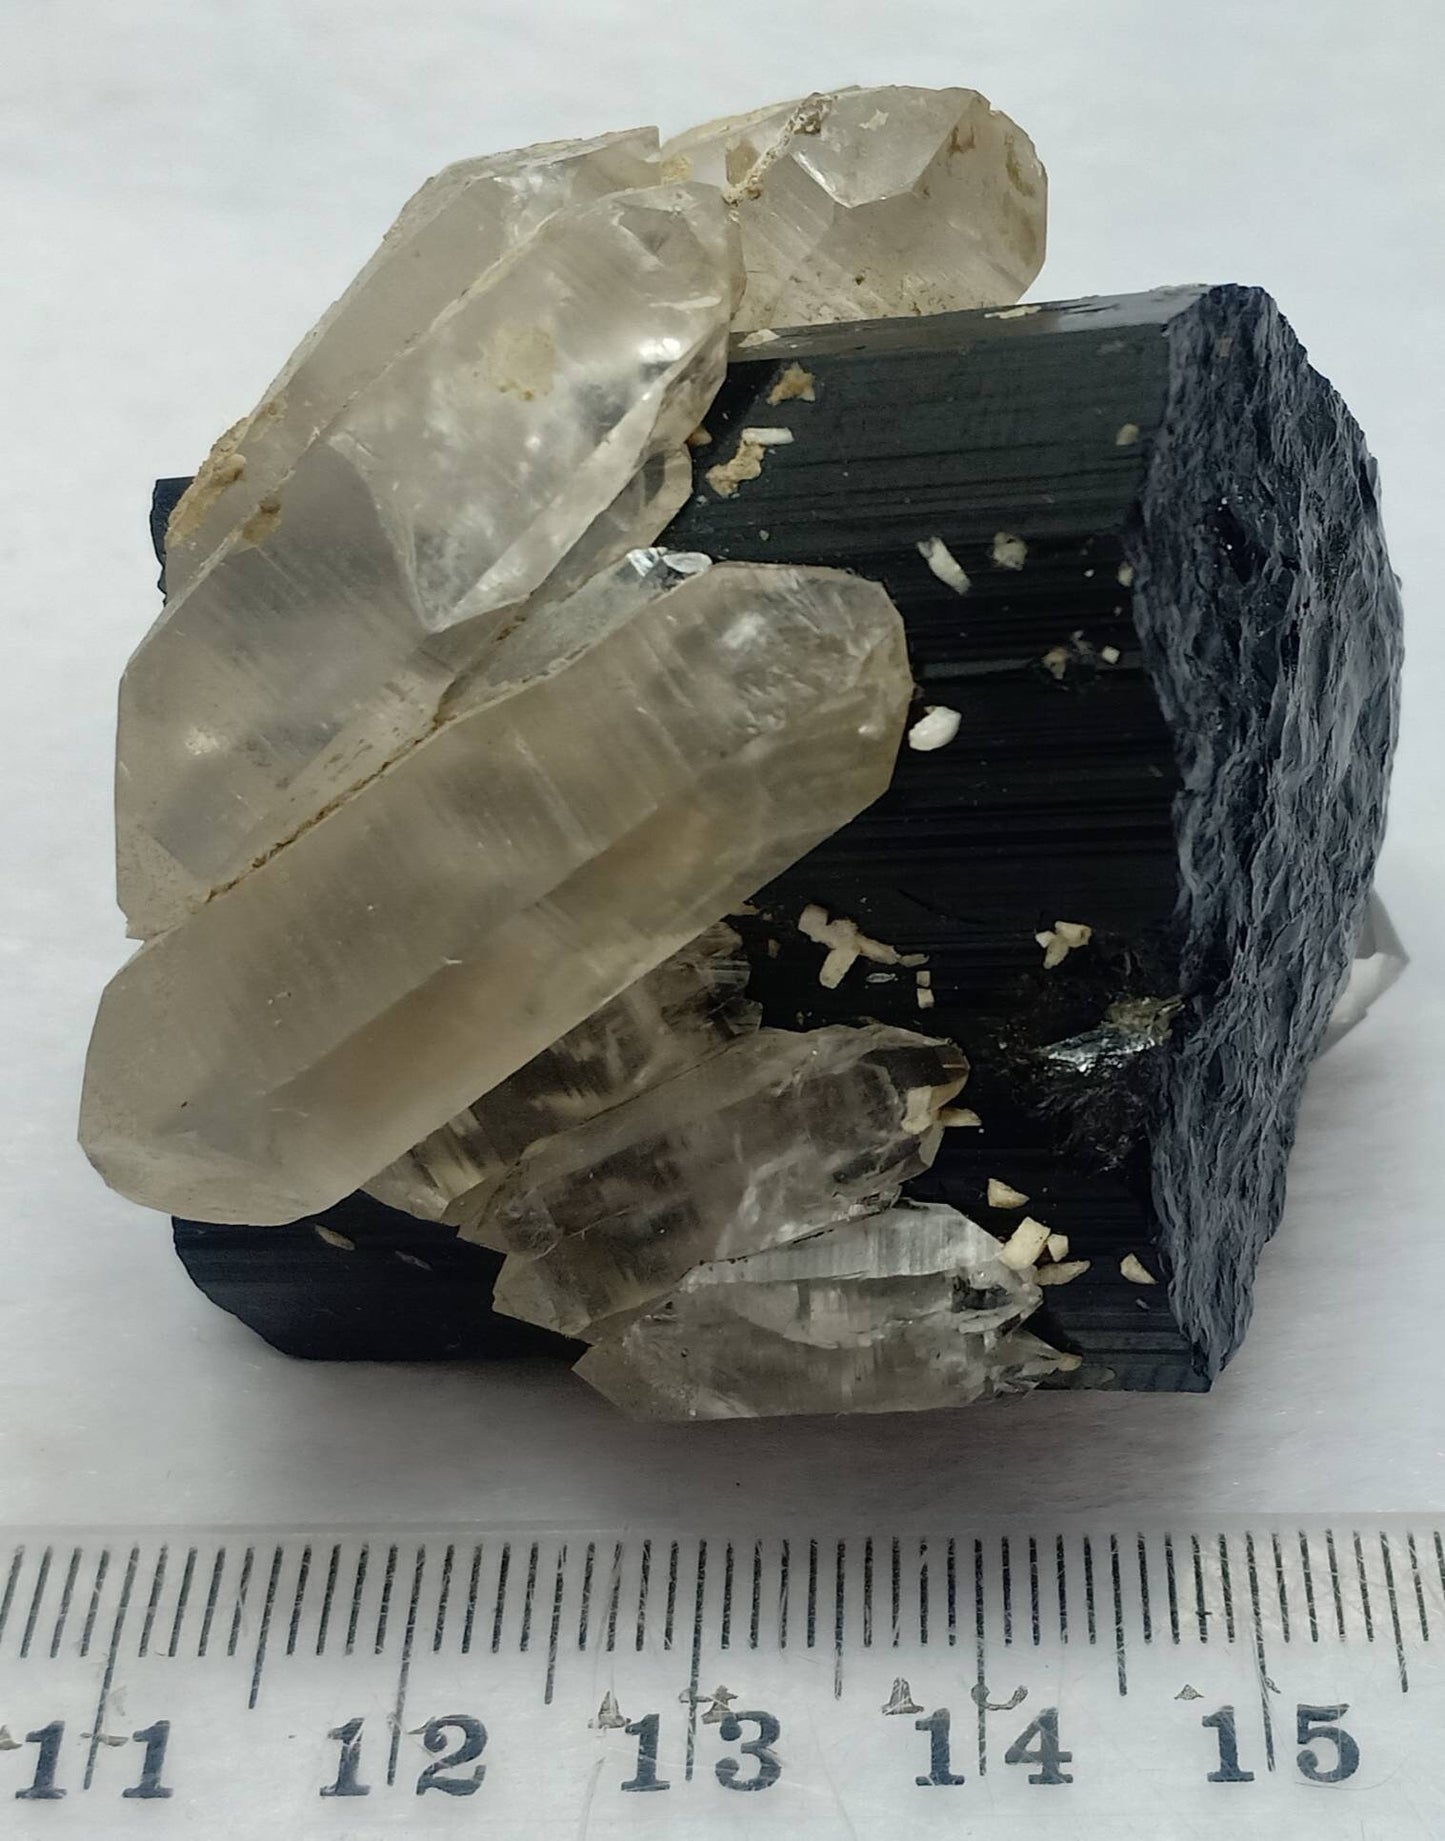 Black Tourmaline crystal nested in terminated quartz crystals 123g